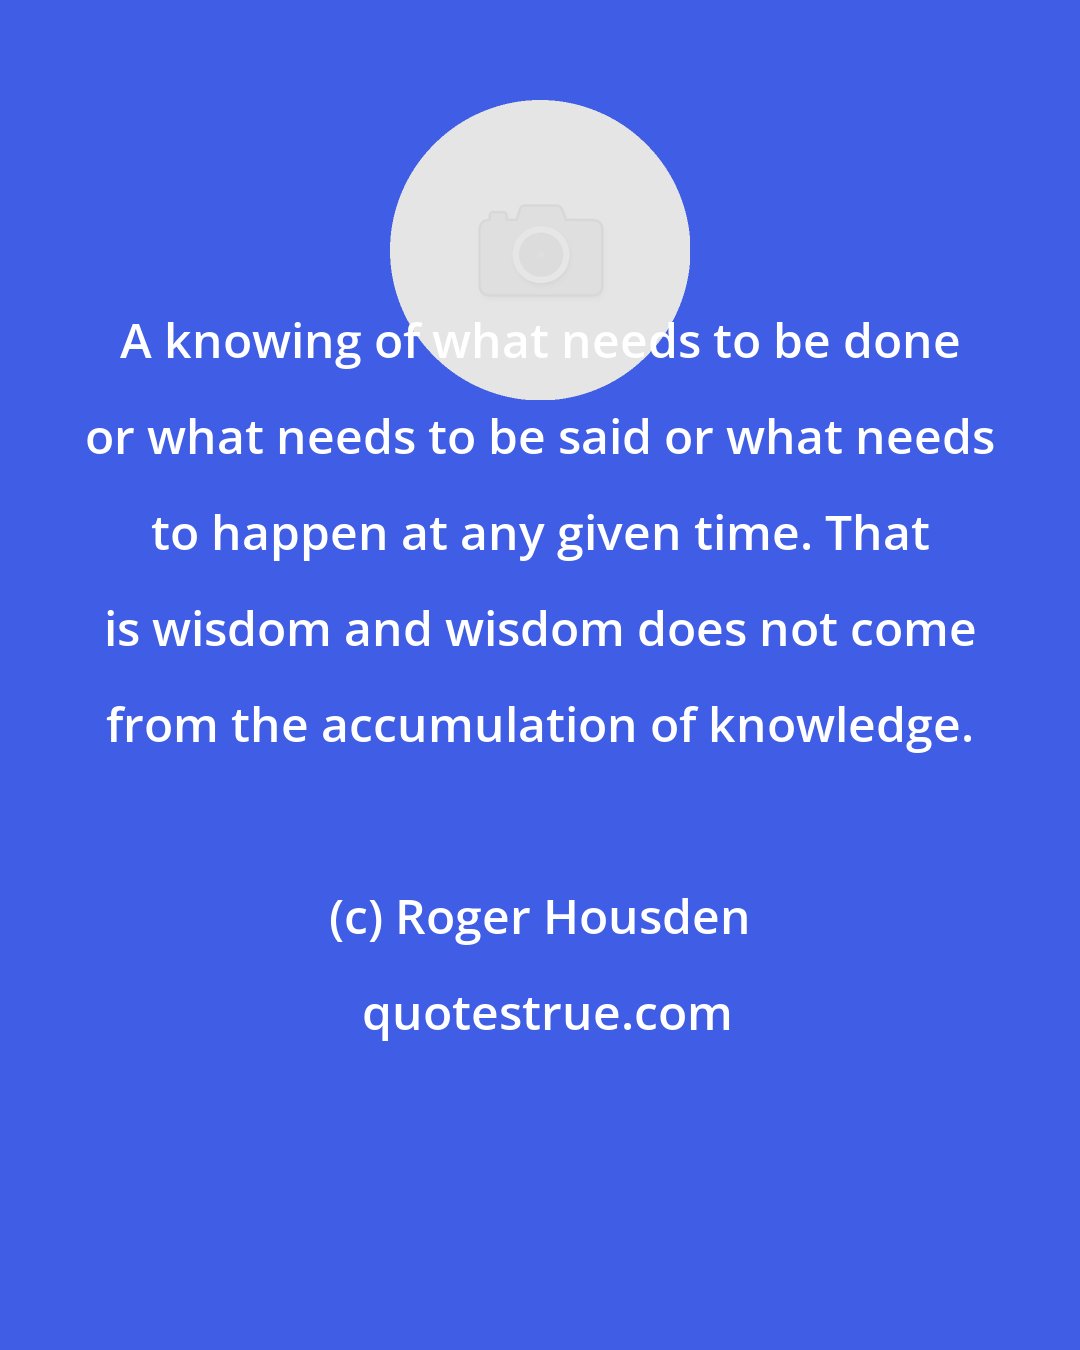 Roger Housden: A knowing of what needs to be done or what needs to be said or what needs to happen at any given time. That is wisdom and wisdom does not come from the accumulation of knowledge.